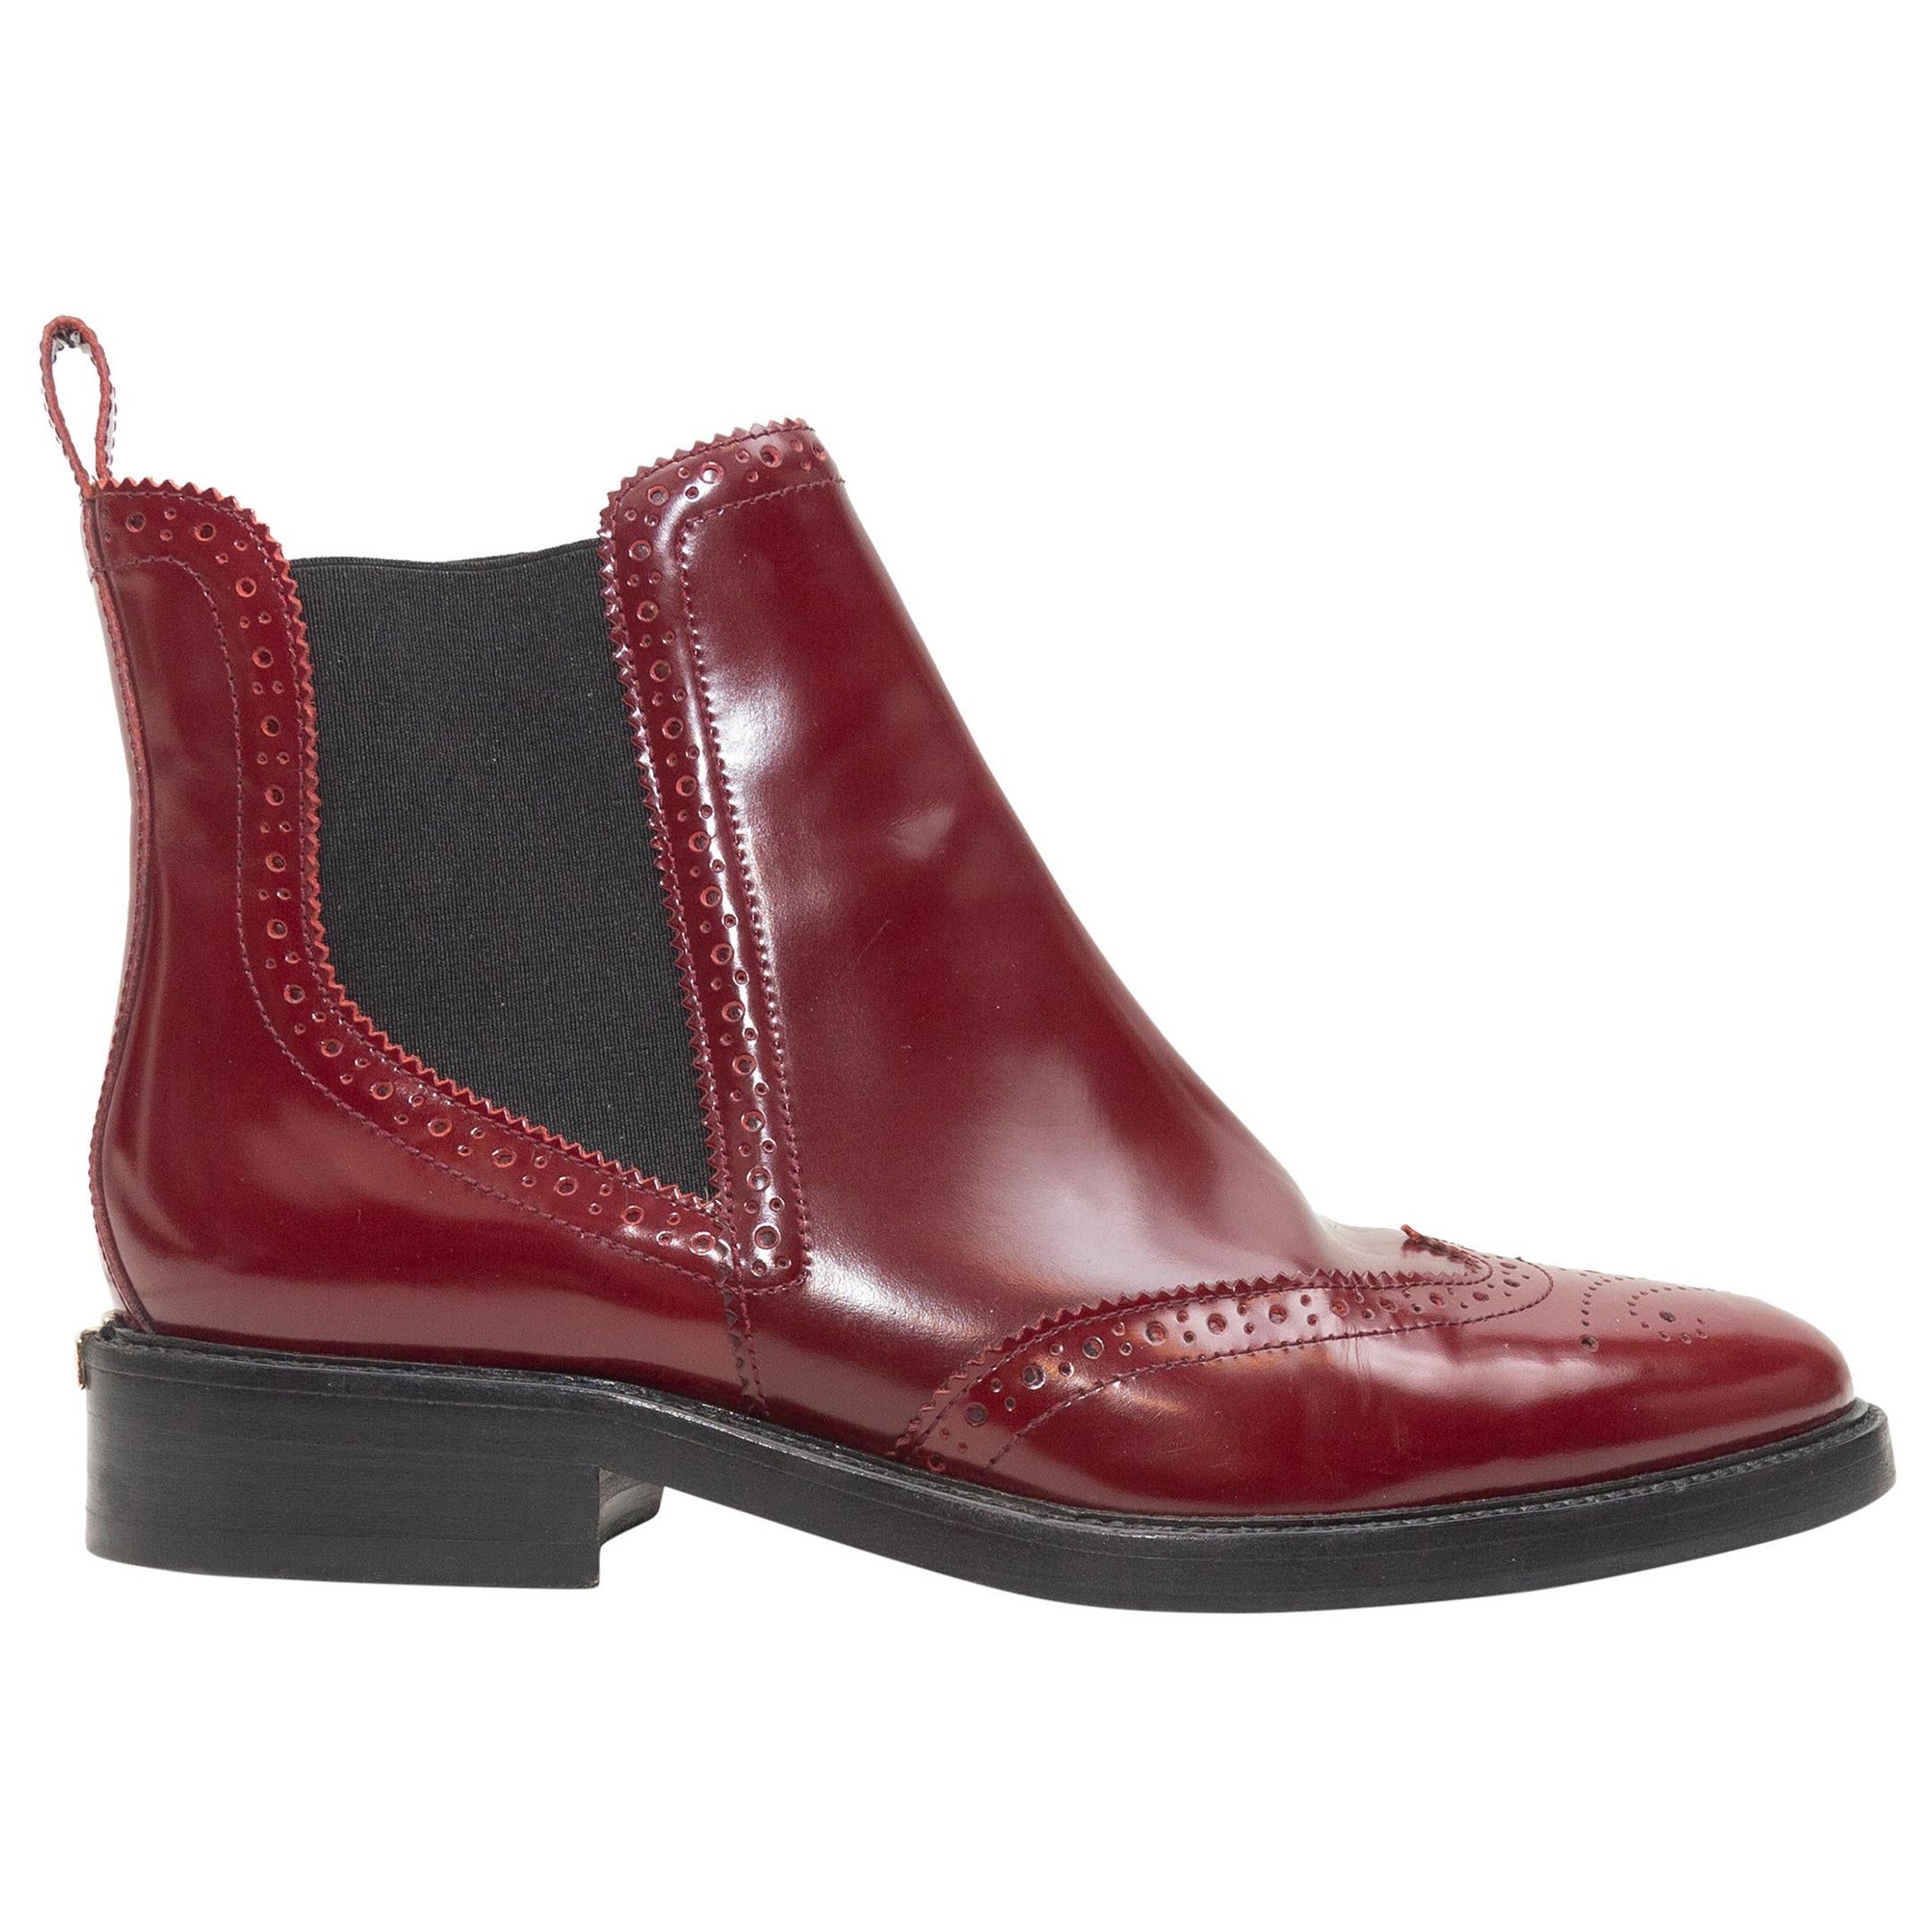  Burberry Maroon Brogue Ankle Boots